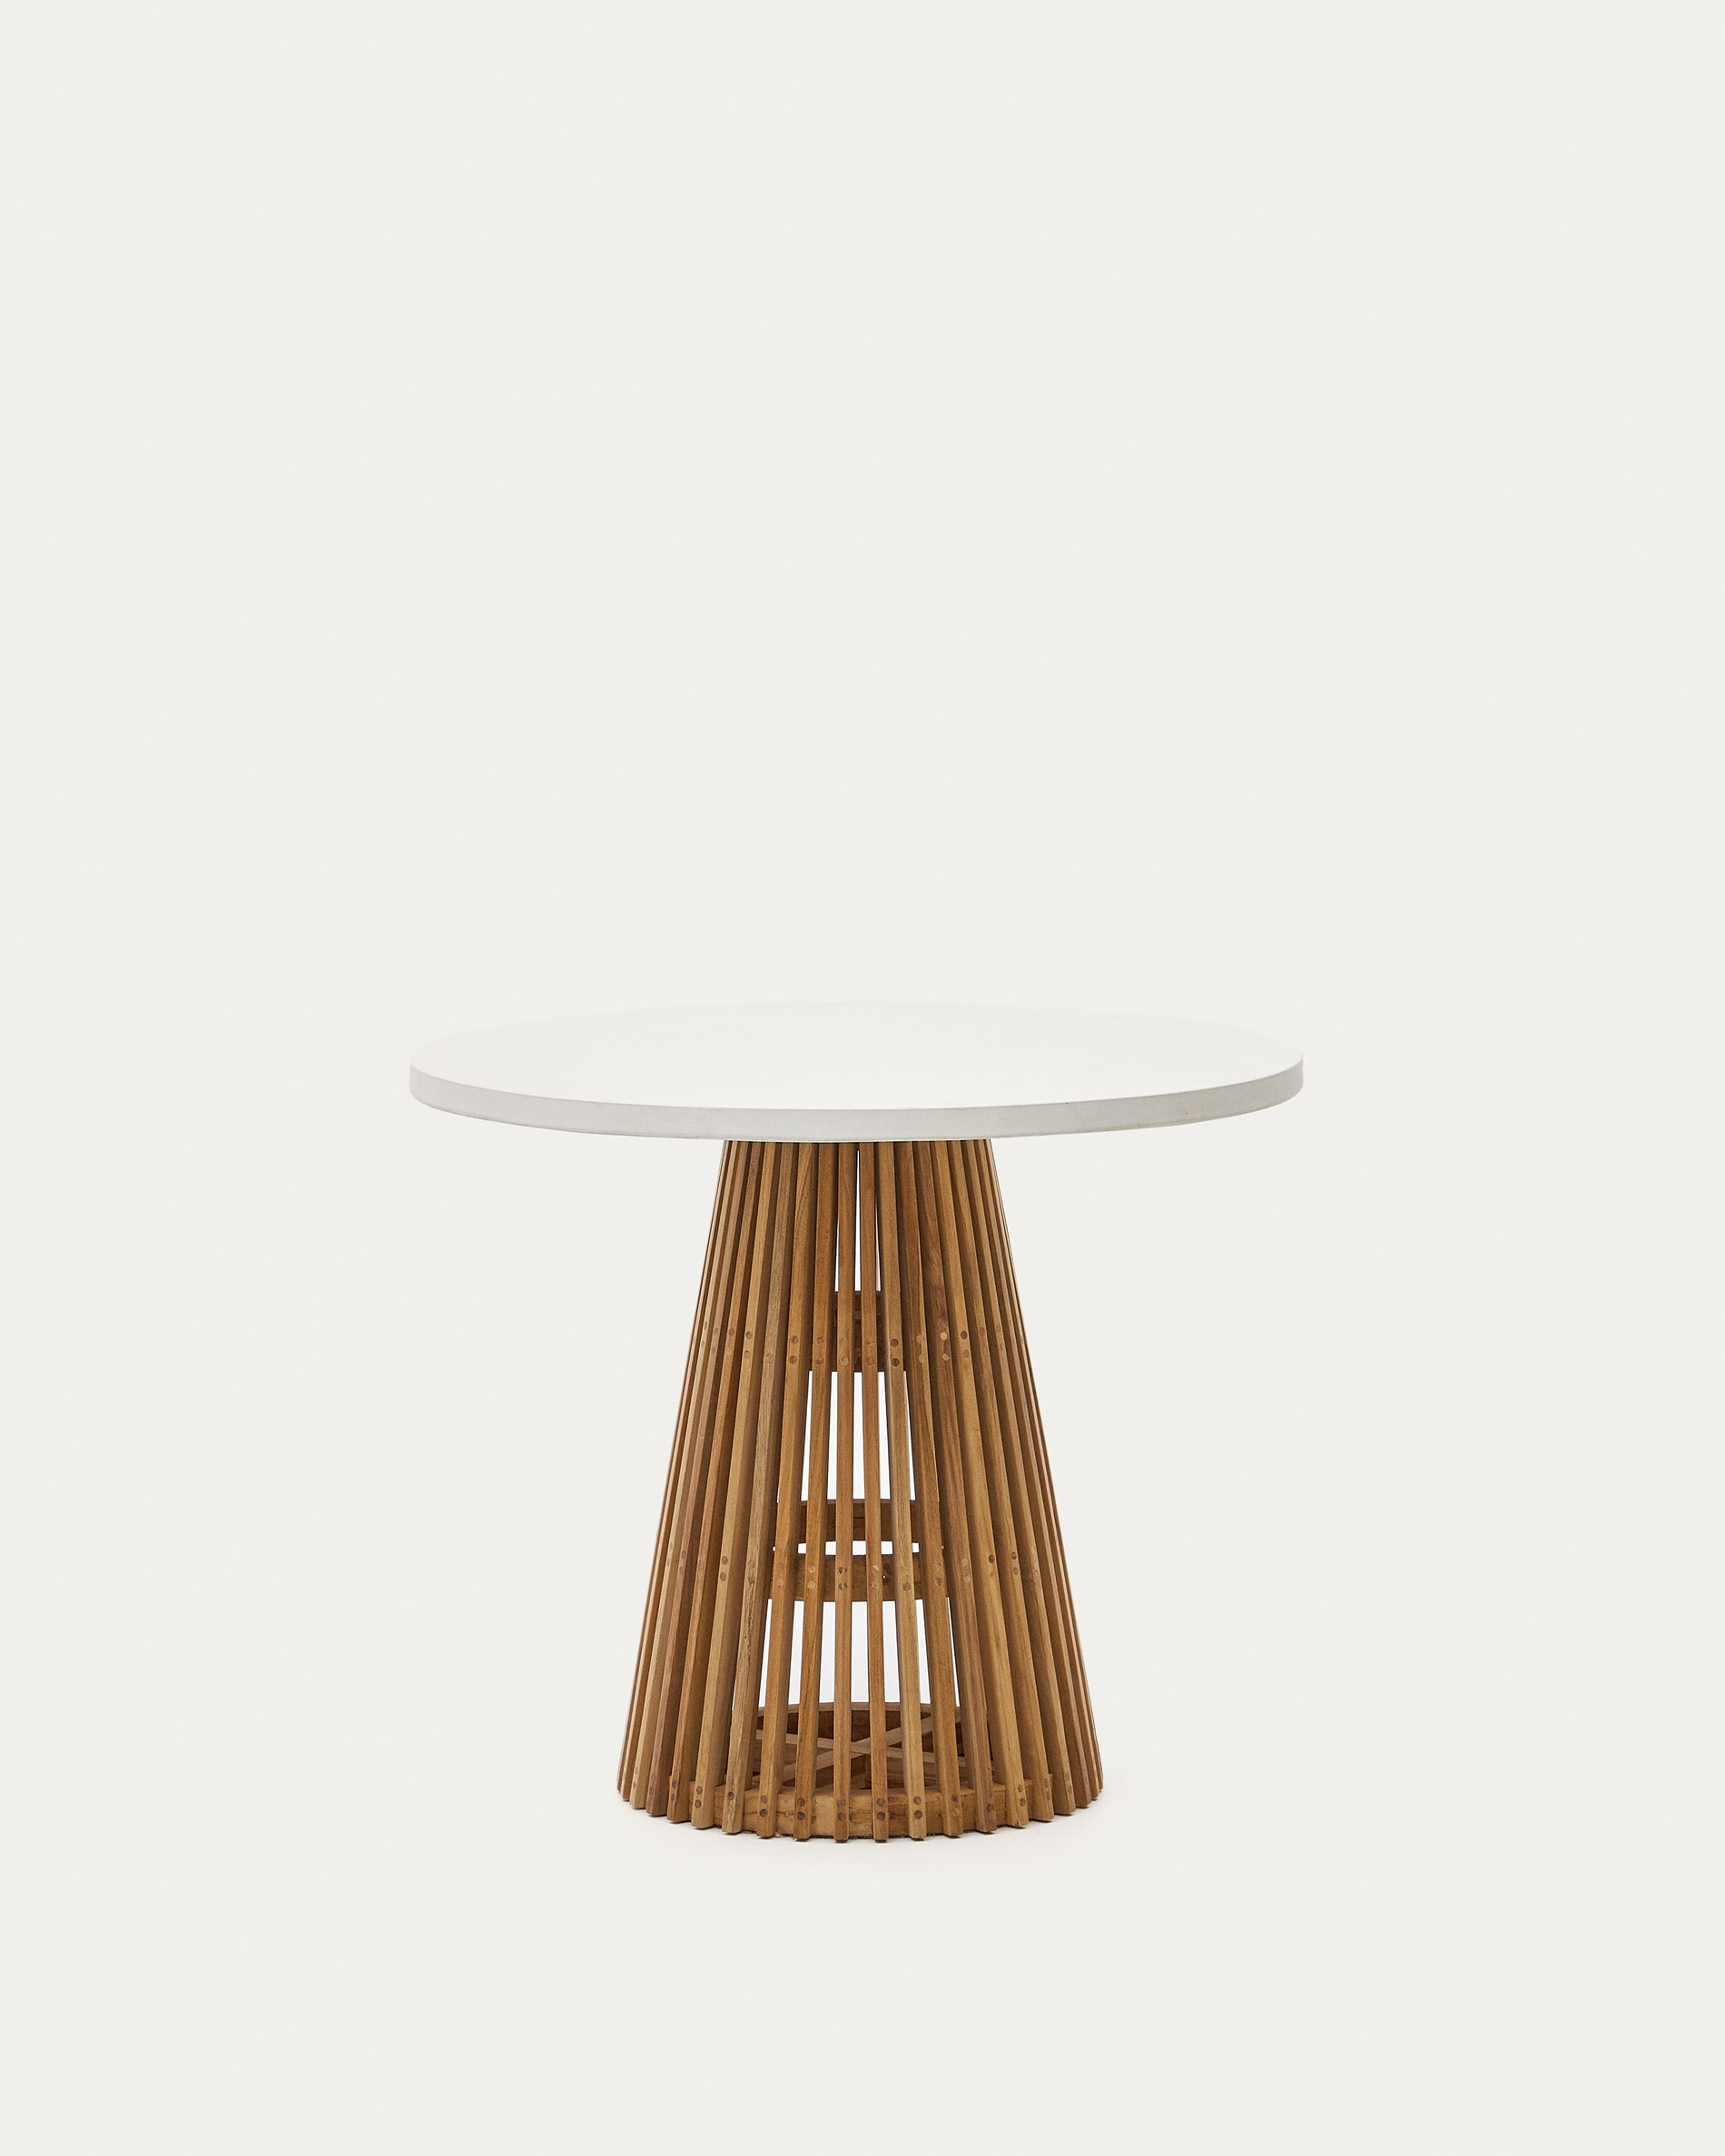 Alcaufar round outdoor table made of solid teak wood and white cement Ø 90 cm